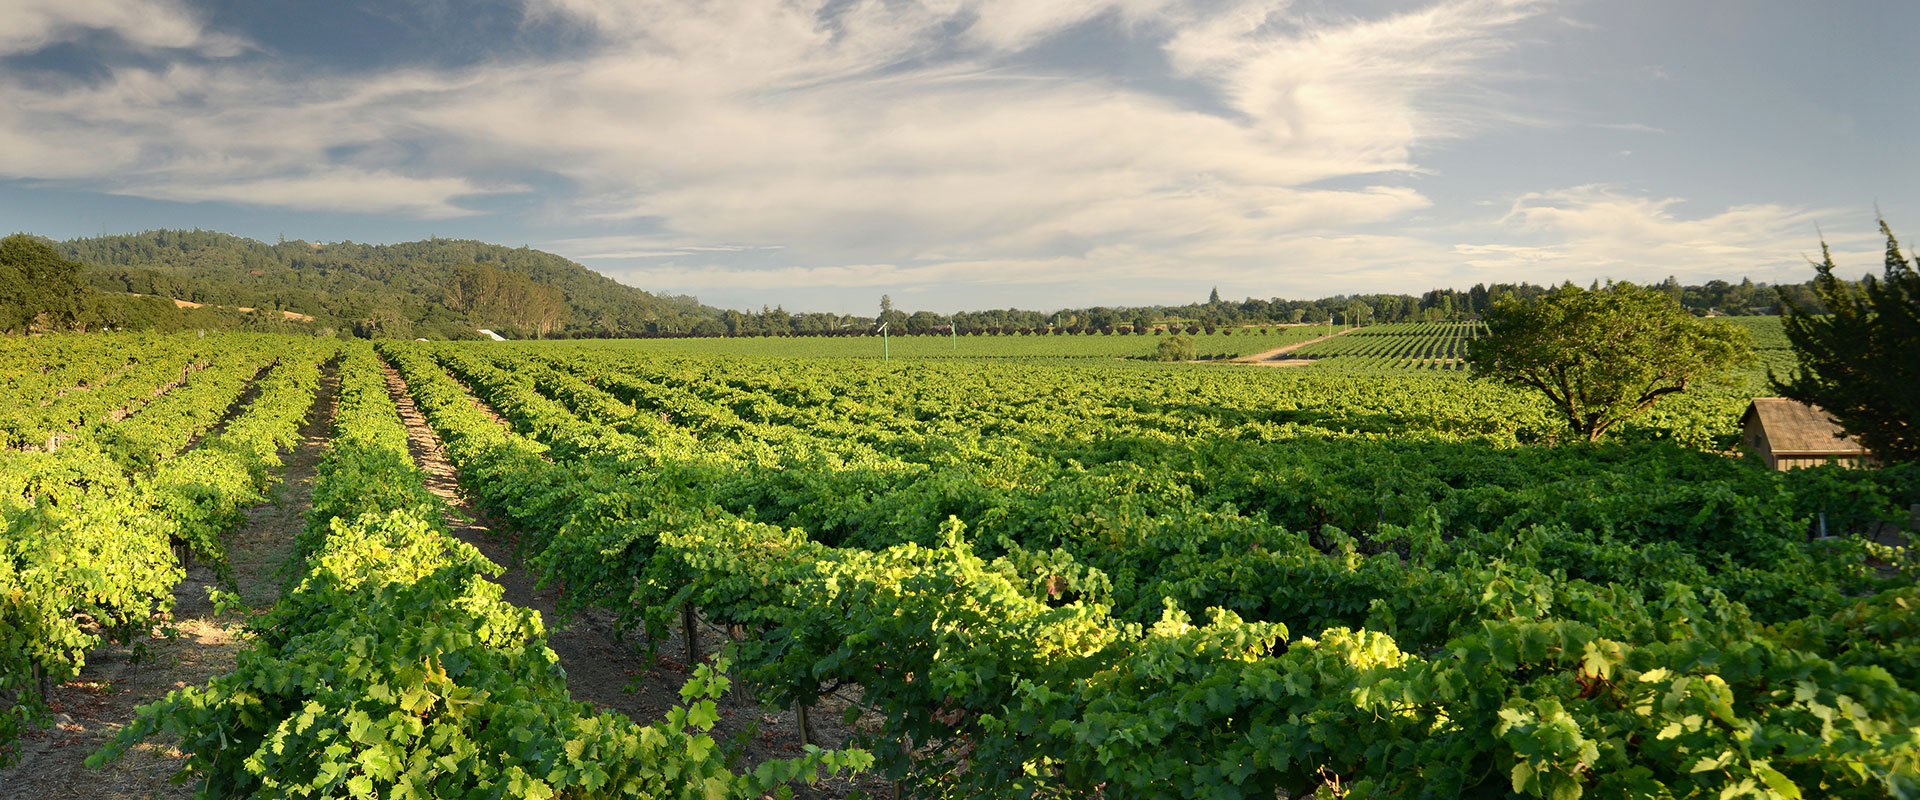 Vast view of lush bright green vineyards against a light blue sky with clouds